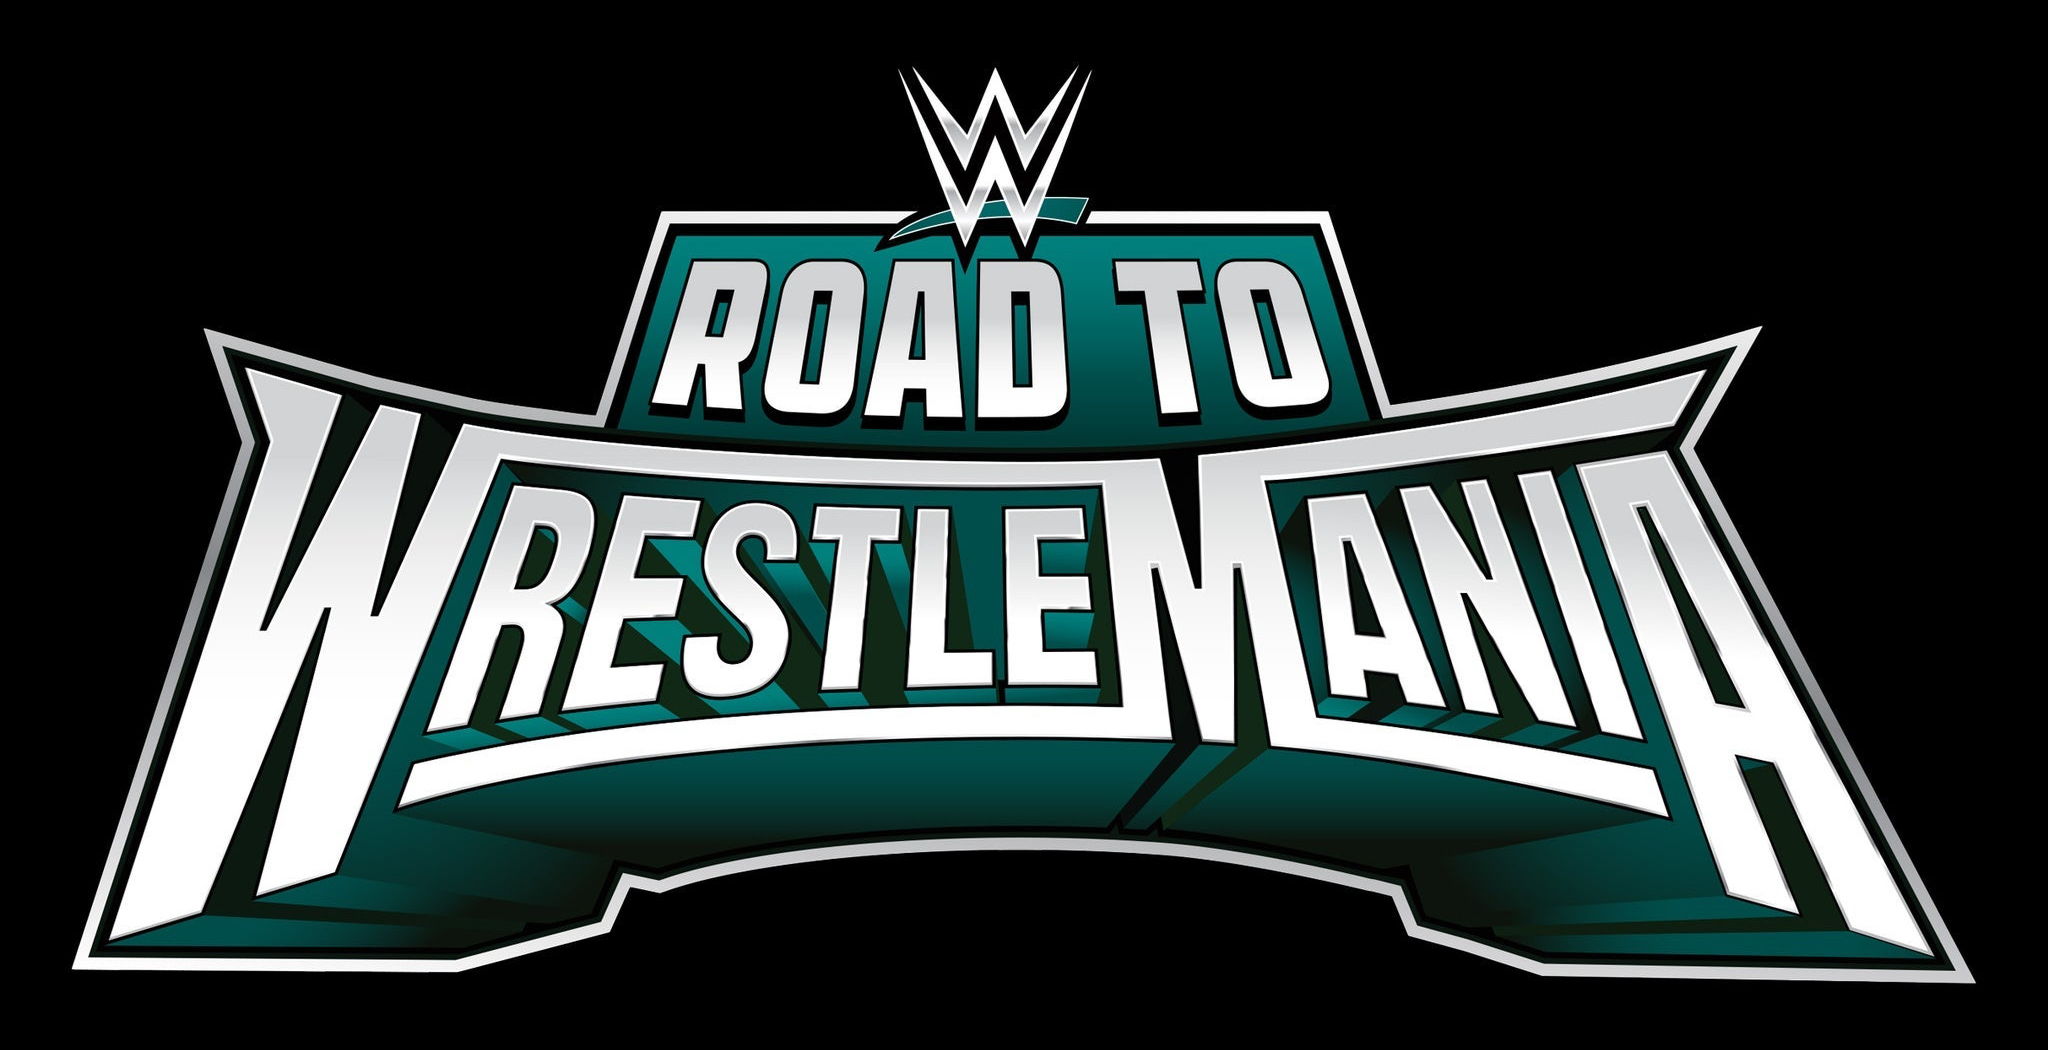 WWE Road to WrestleMania at Oakland Arena Oakland Alameda County